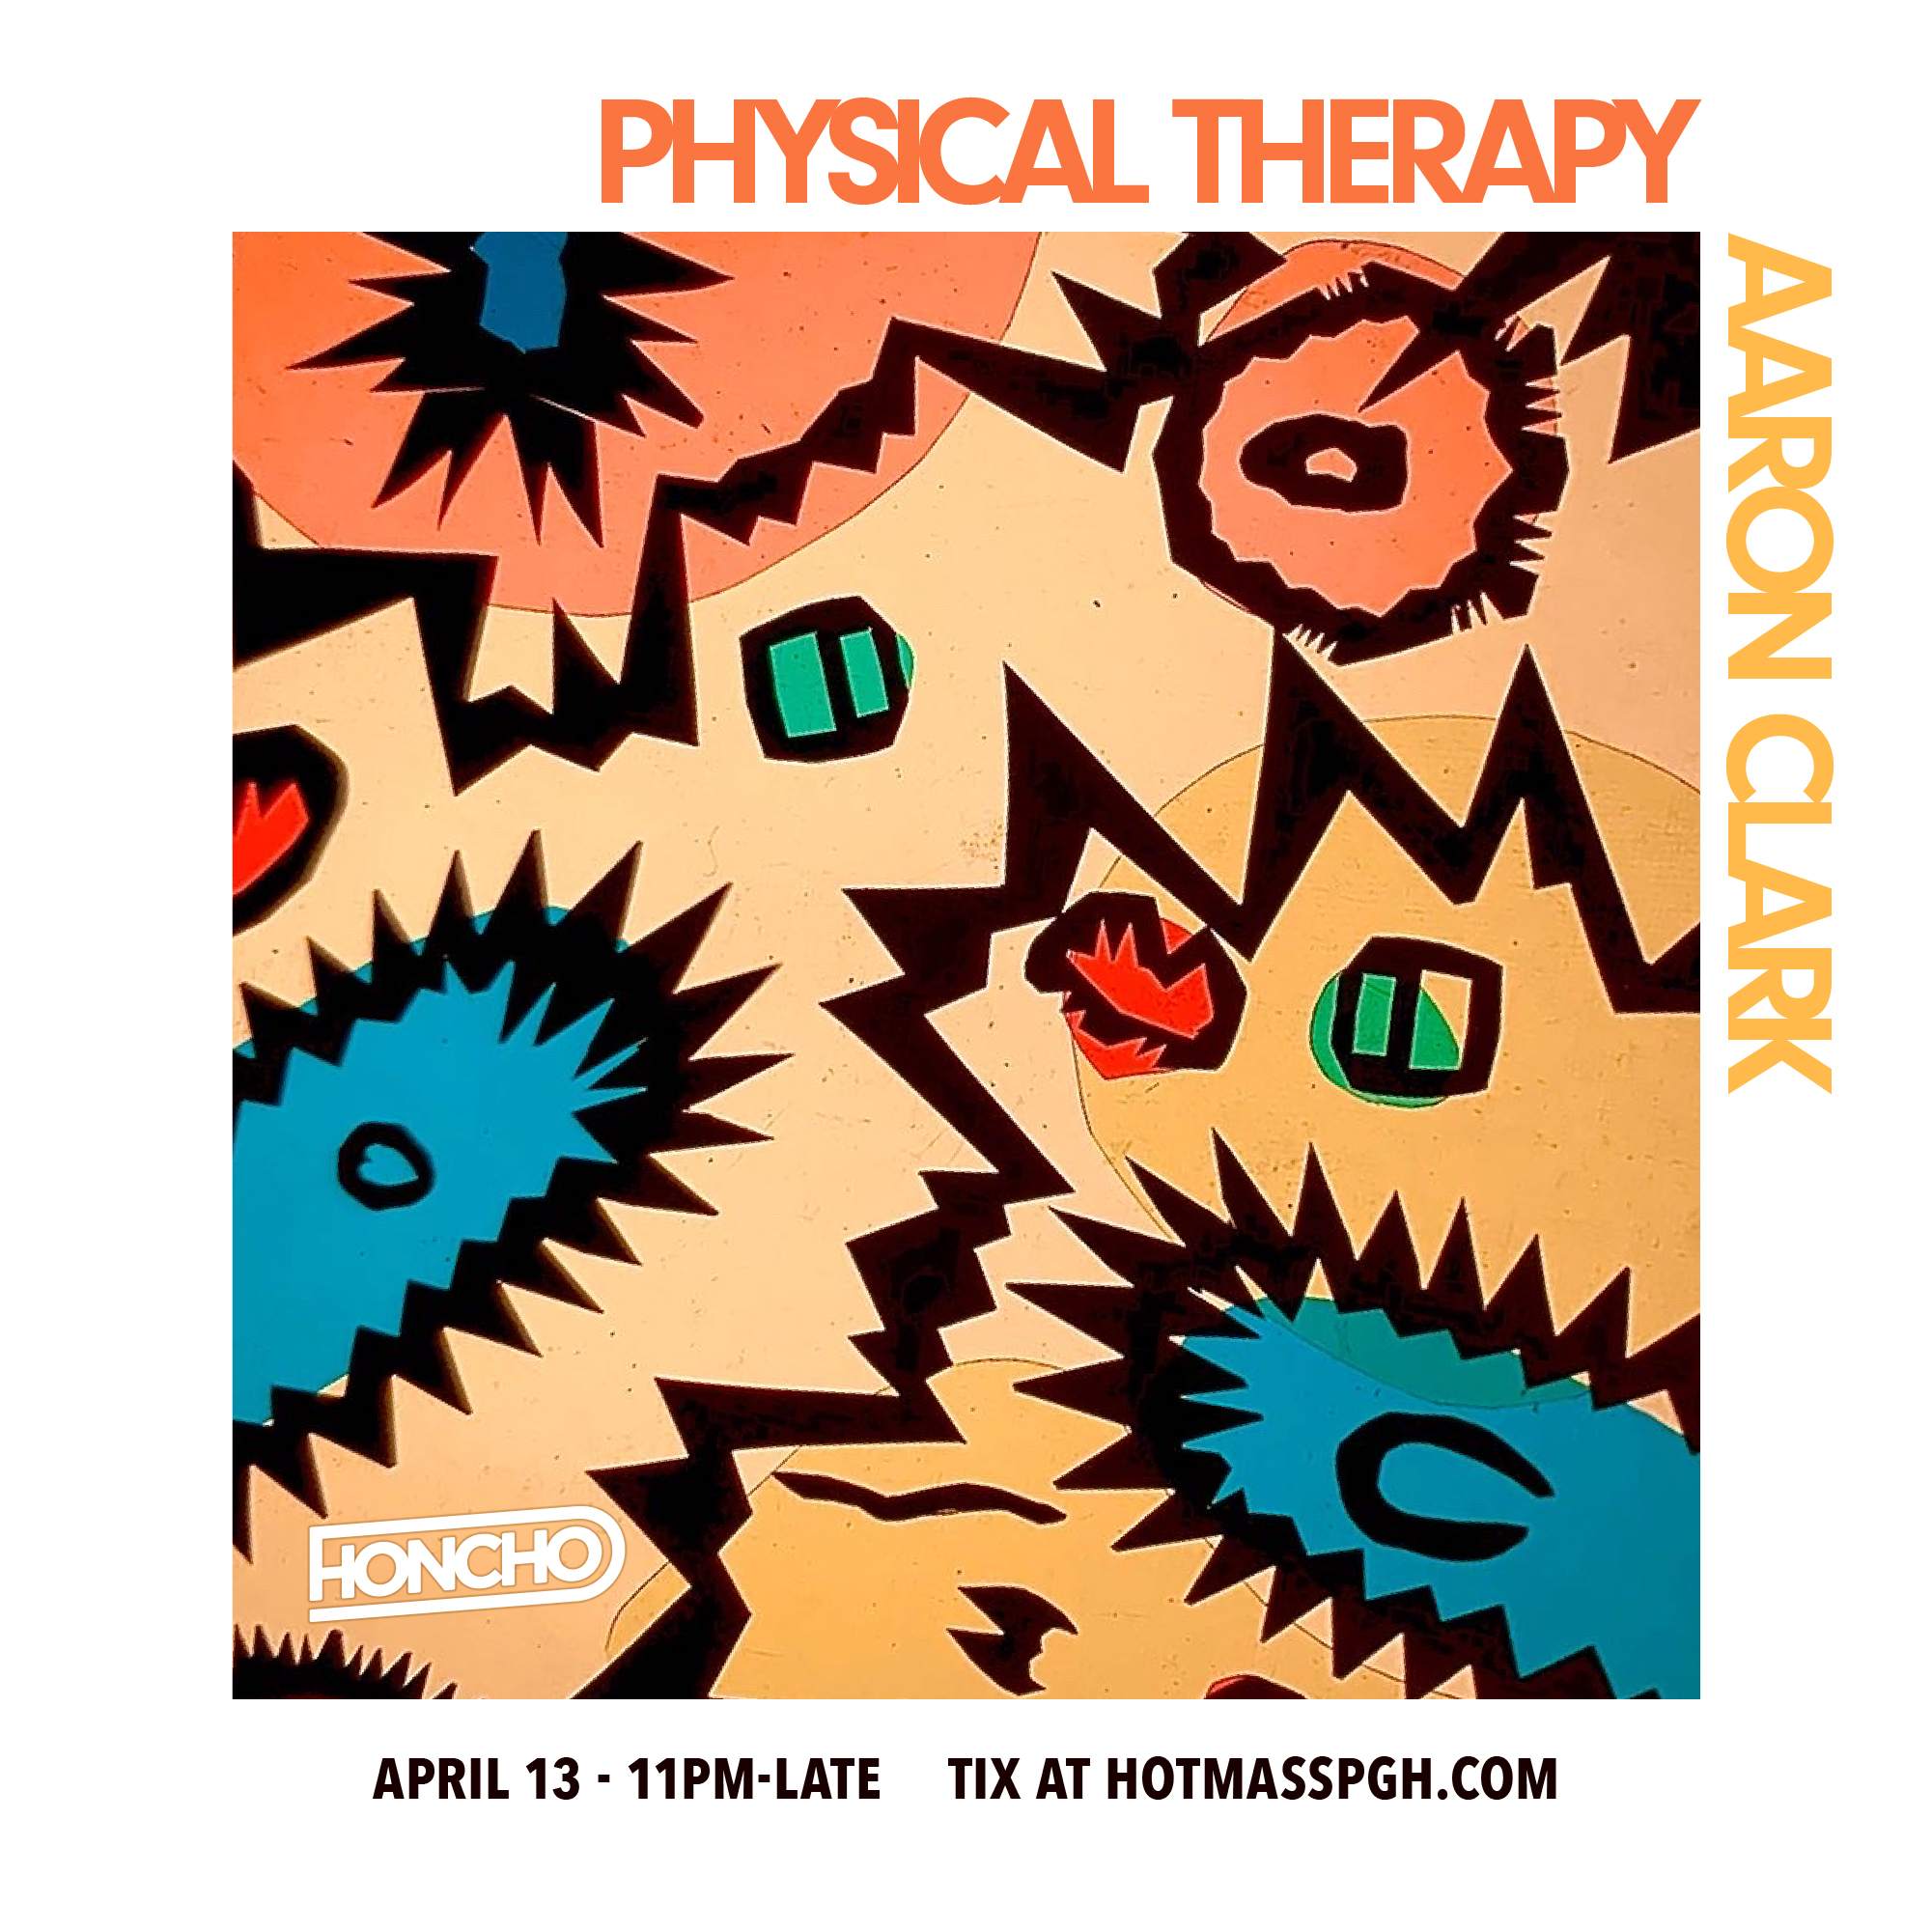 Honcho with Physical Therapy & Aaron Clark - フライヤー表